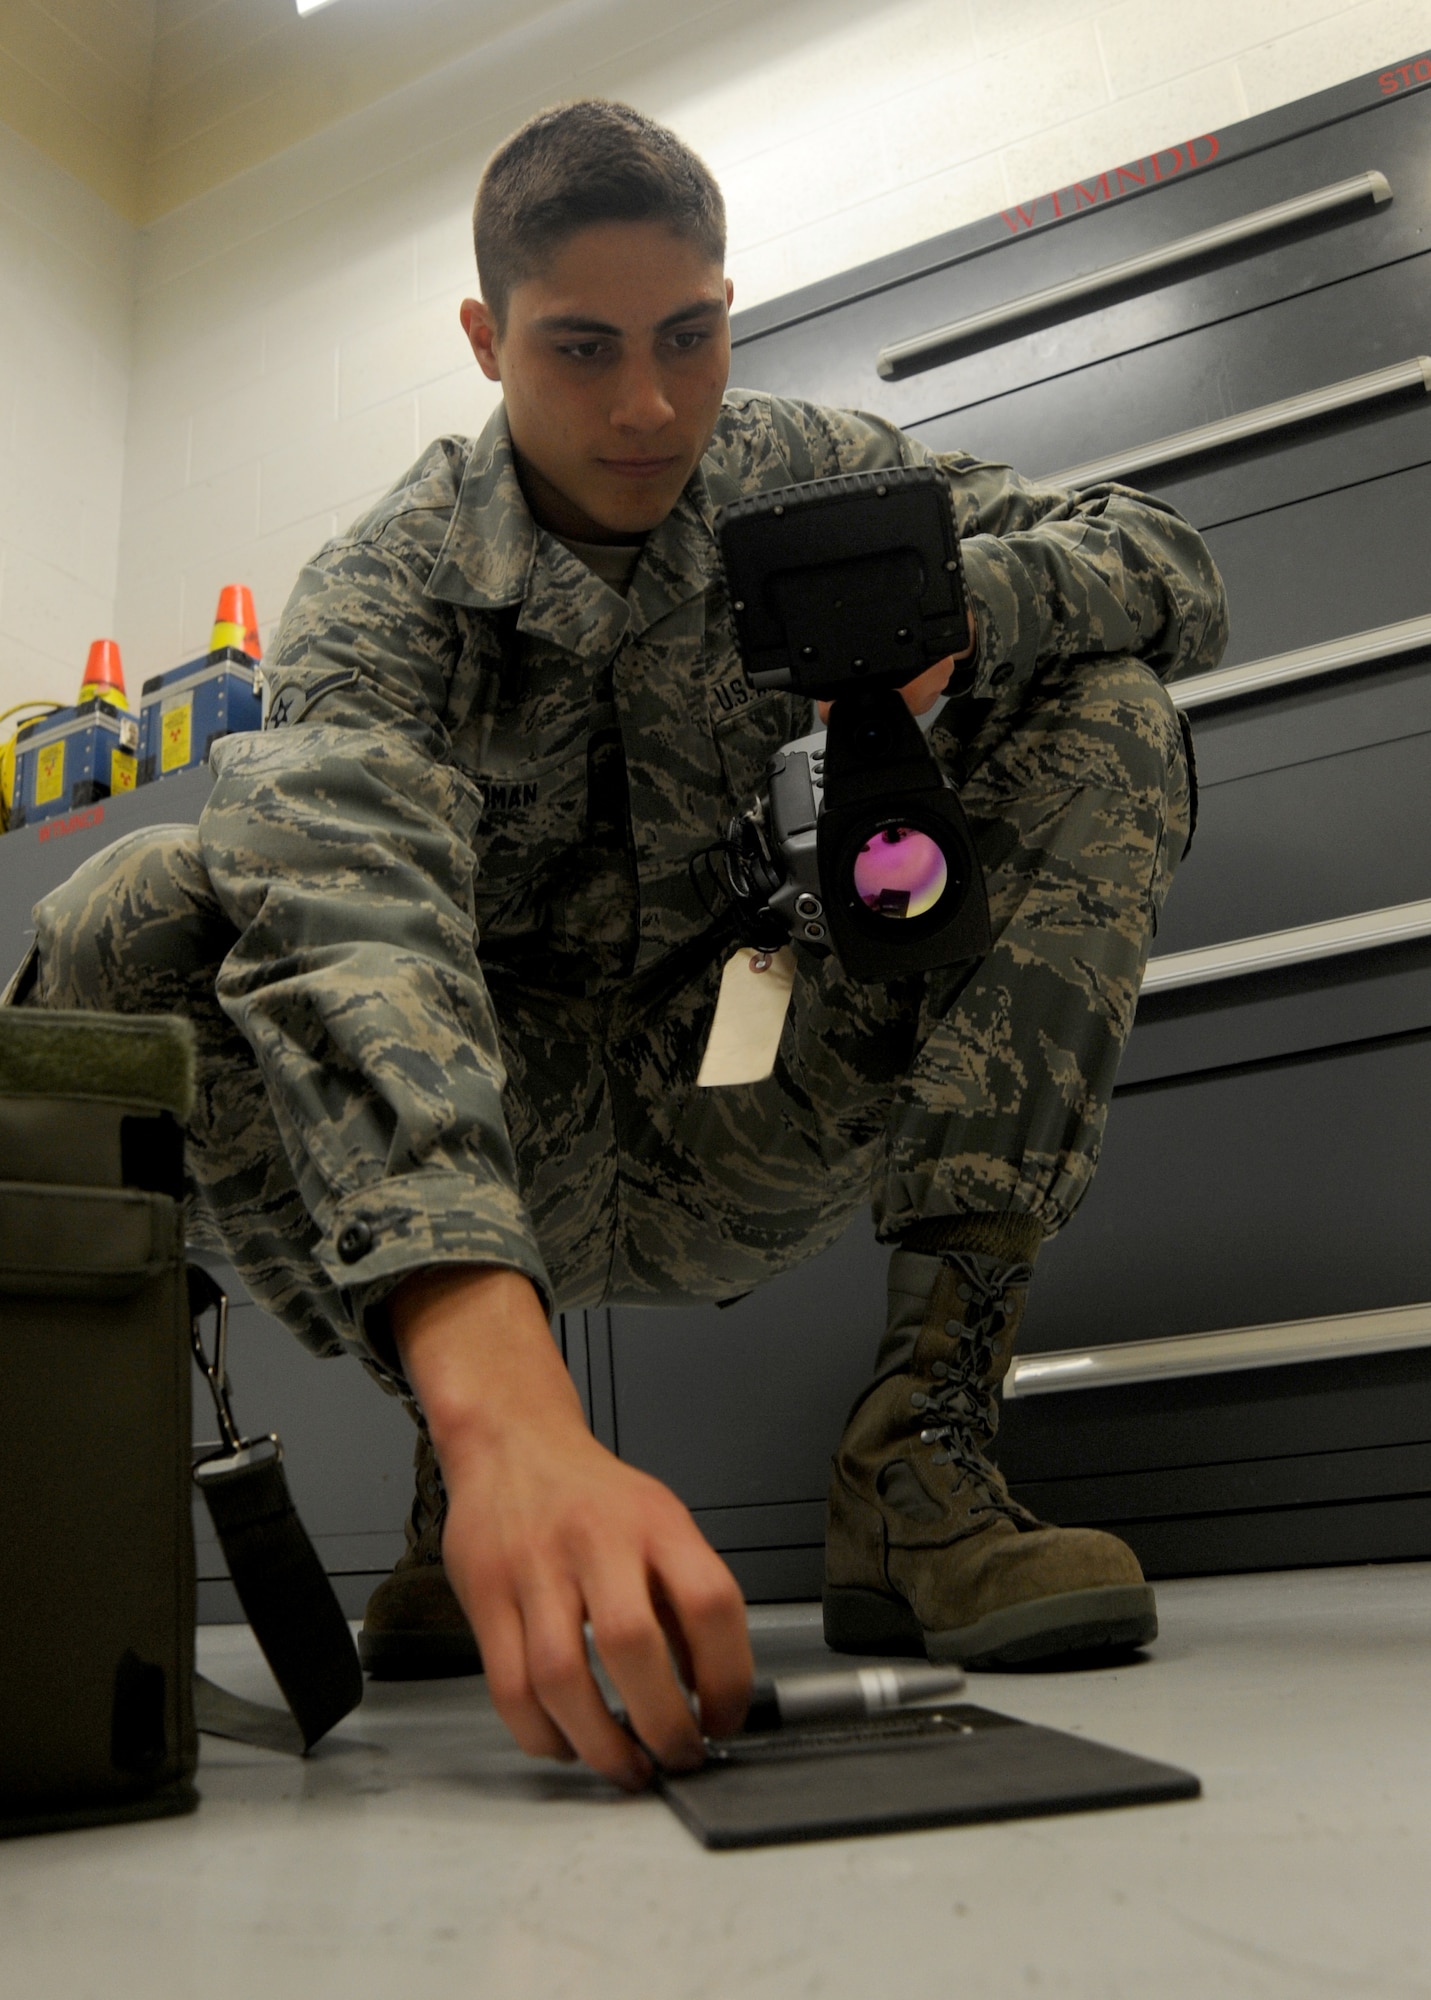 Airman Kawika Cadman, 509th Maintenance Squadron non-destructive inspection technician, prepares his infrared technology to search for discrepancies on individual aircraft parts at Whiteman Air Force Base, Mo., May 8, 2014. To become fully trained to work on aircraft, NDI shop members attend a 10-week technical training course and complete 12 months of on-the-job training. (U.S. Air Force photo by Senior Airman Bryan Crane/Released)